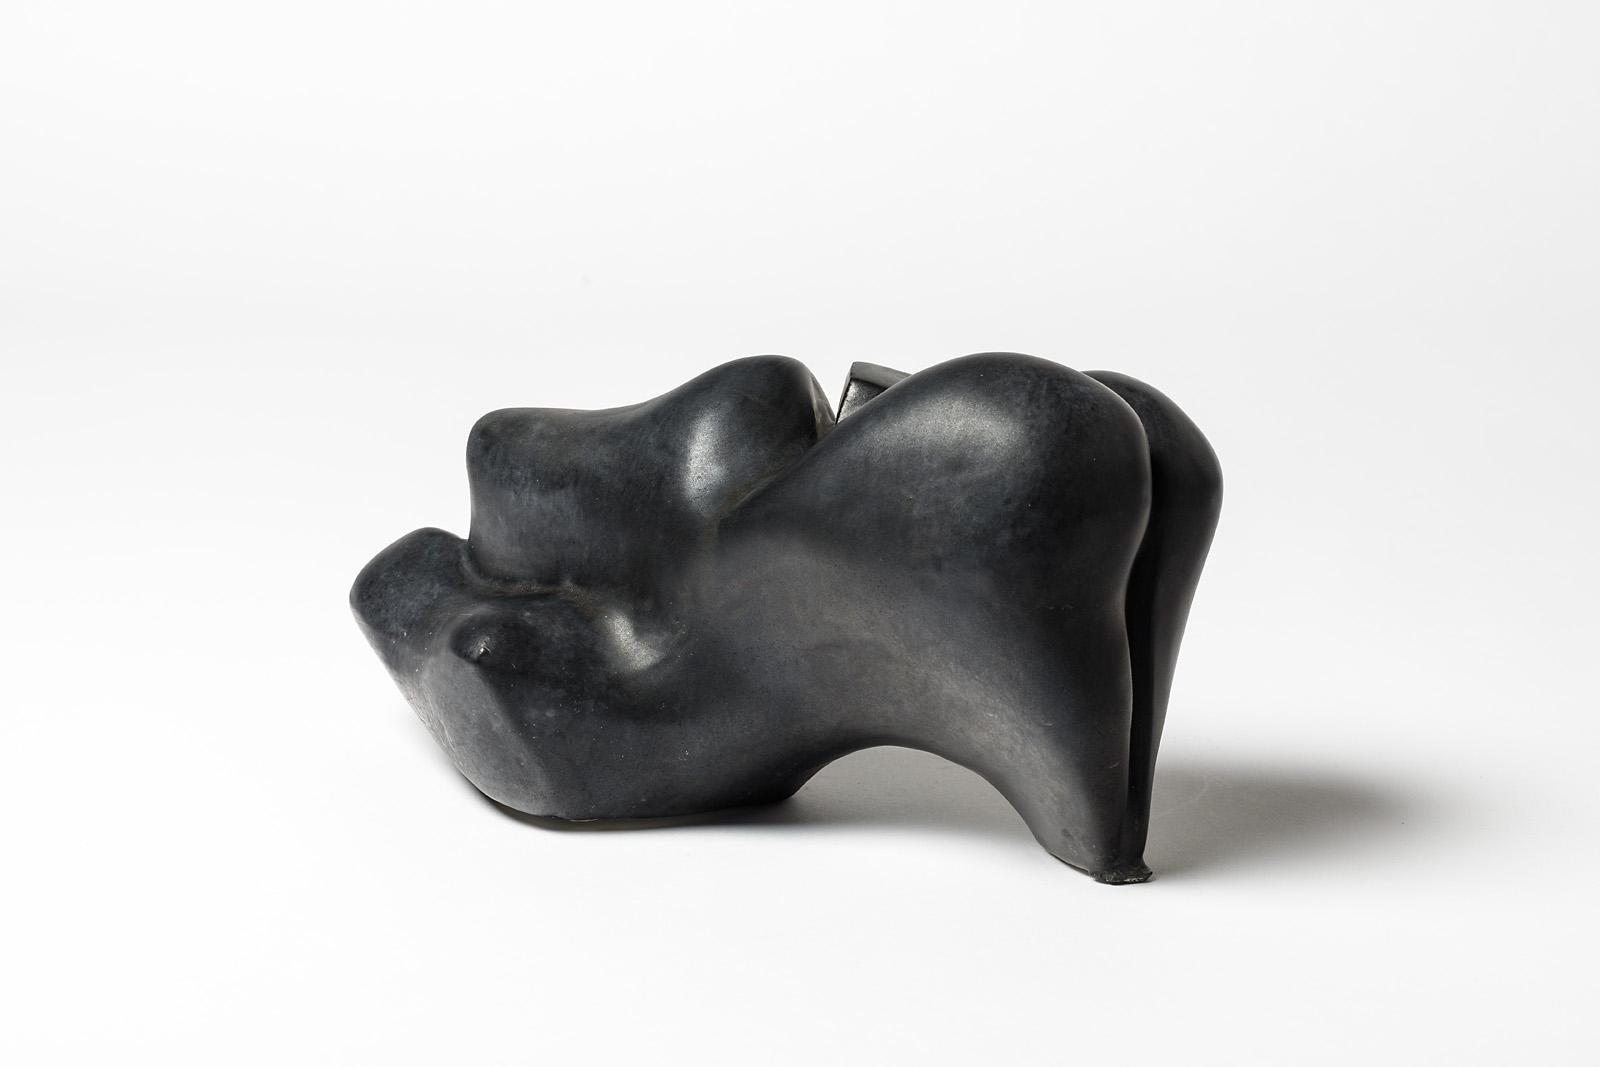 French Porcelain Sculpture with Black Glaze Decoration by Tim Orr, circa 1970